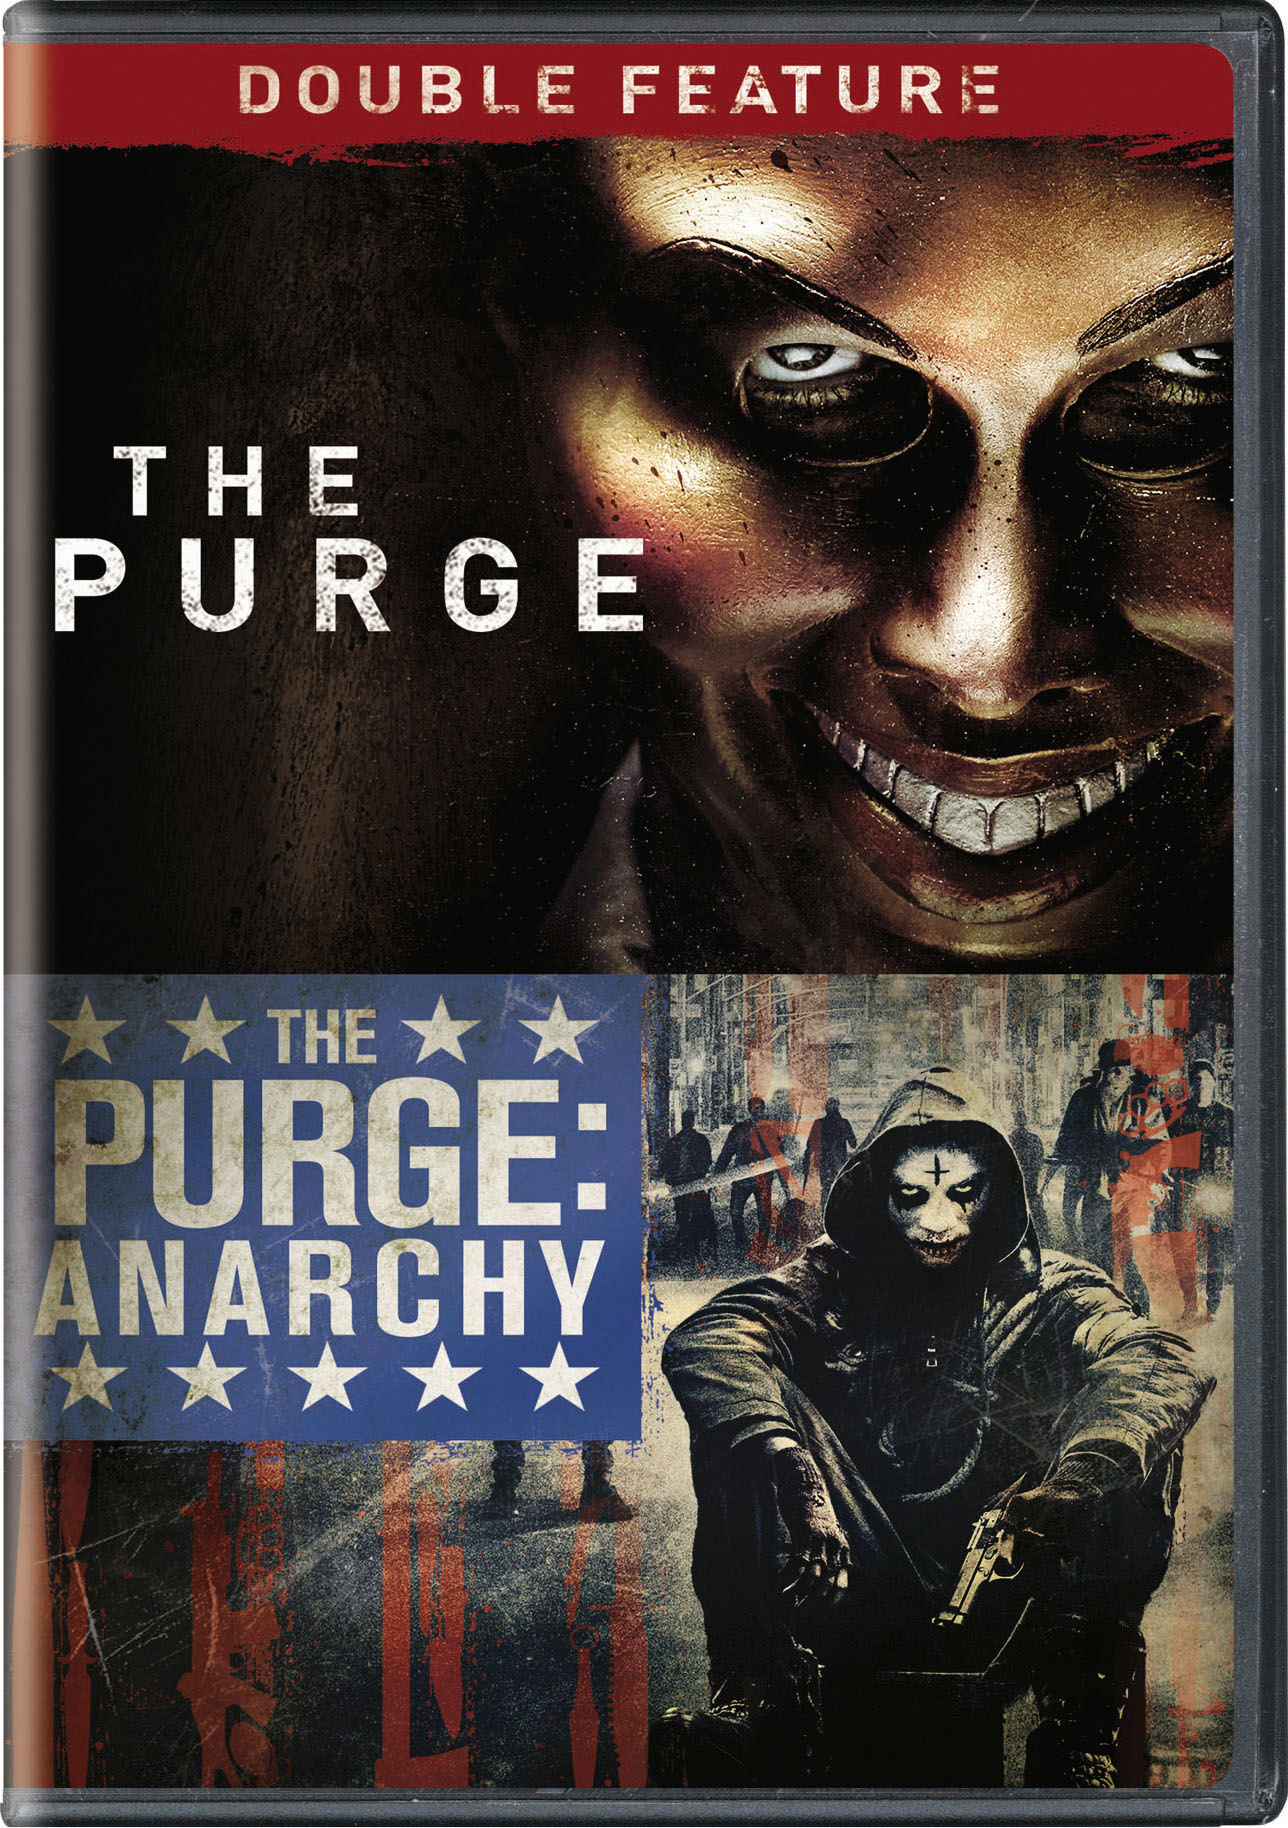 The Purge/The Purge: Anarchy (DVD Double Feature) - DVD [ 2014 ]  - Horror Movies On DVD - Movies On GRUV